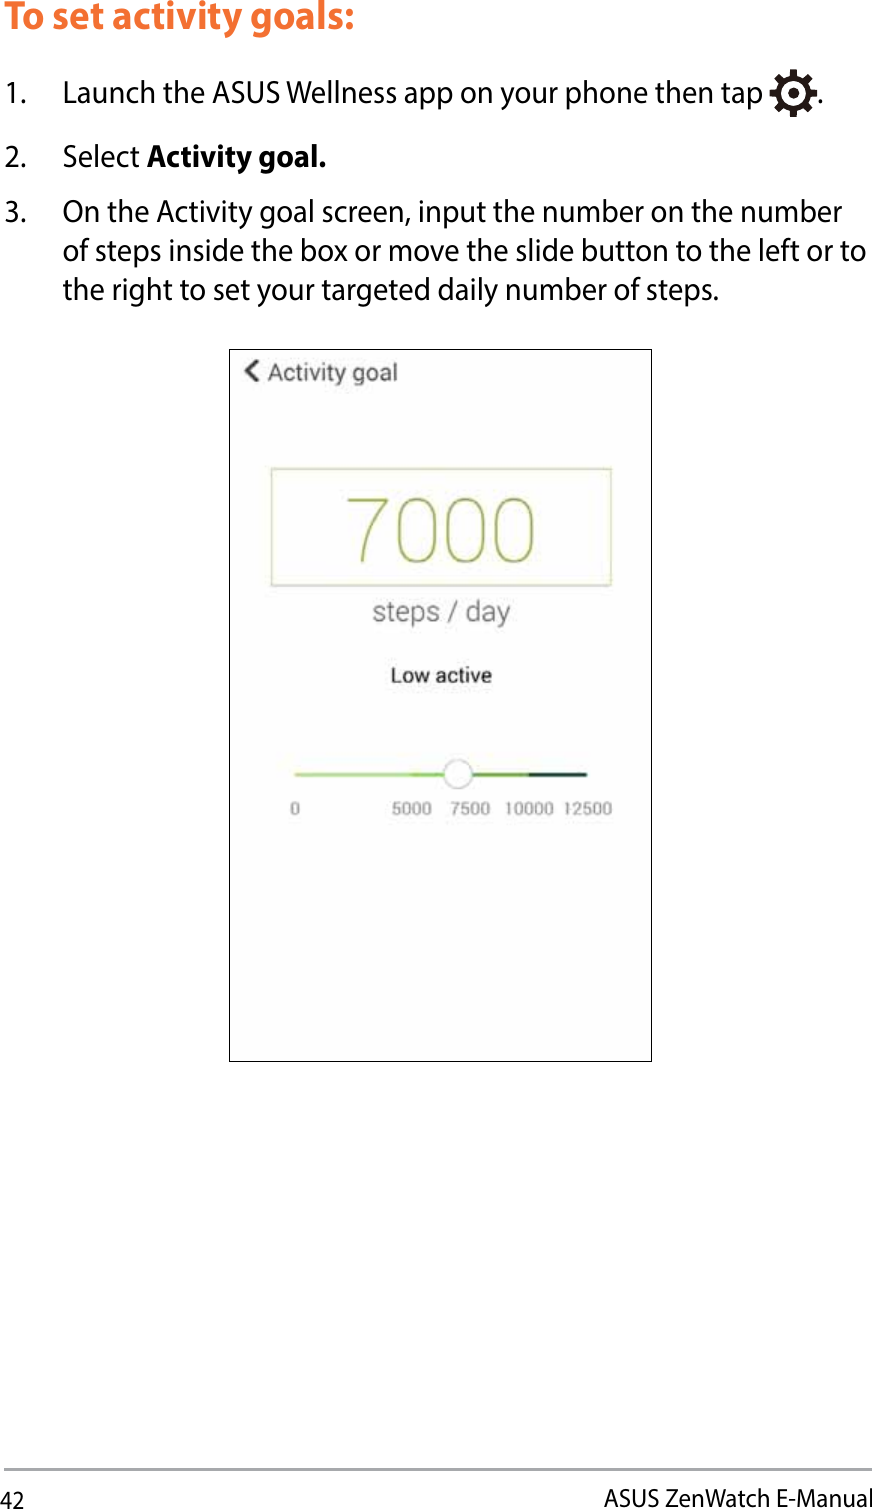 42ASUS ZenWatch E-ManualTo set activity goals:1.  Launch the ASUS Wellness app on your phone then tap  .2. Select Activity goal.3.  On the Activity goal screen, input the number on the number of steps inside the box or move the slide button to the left or to the right to set your targeted daily number of steps.